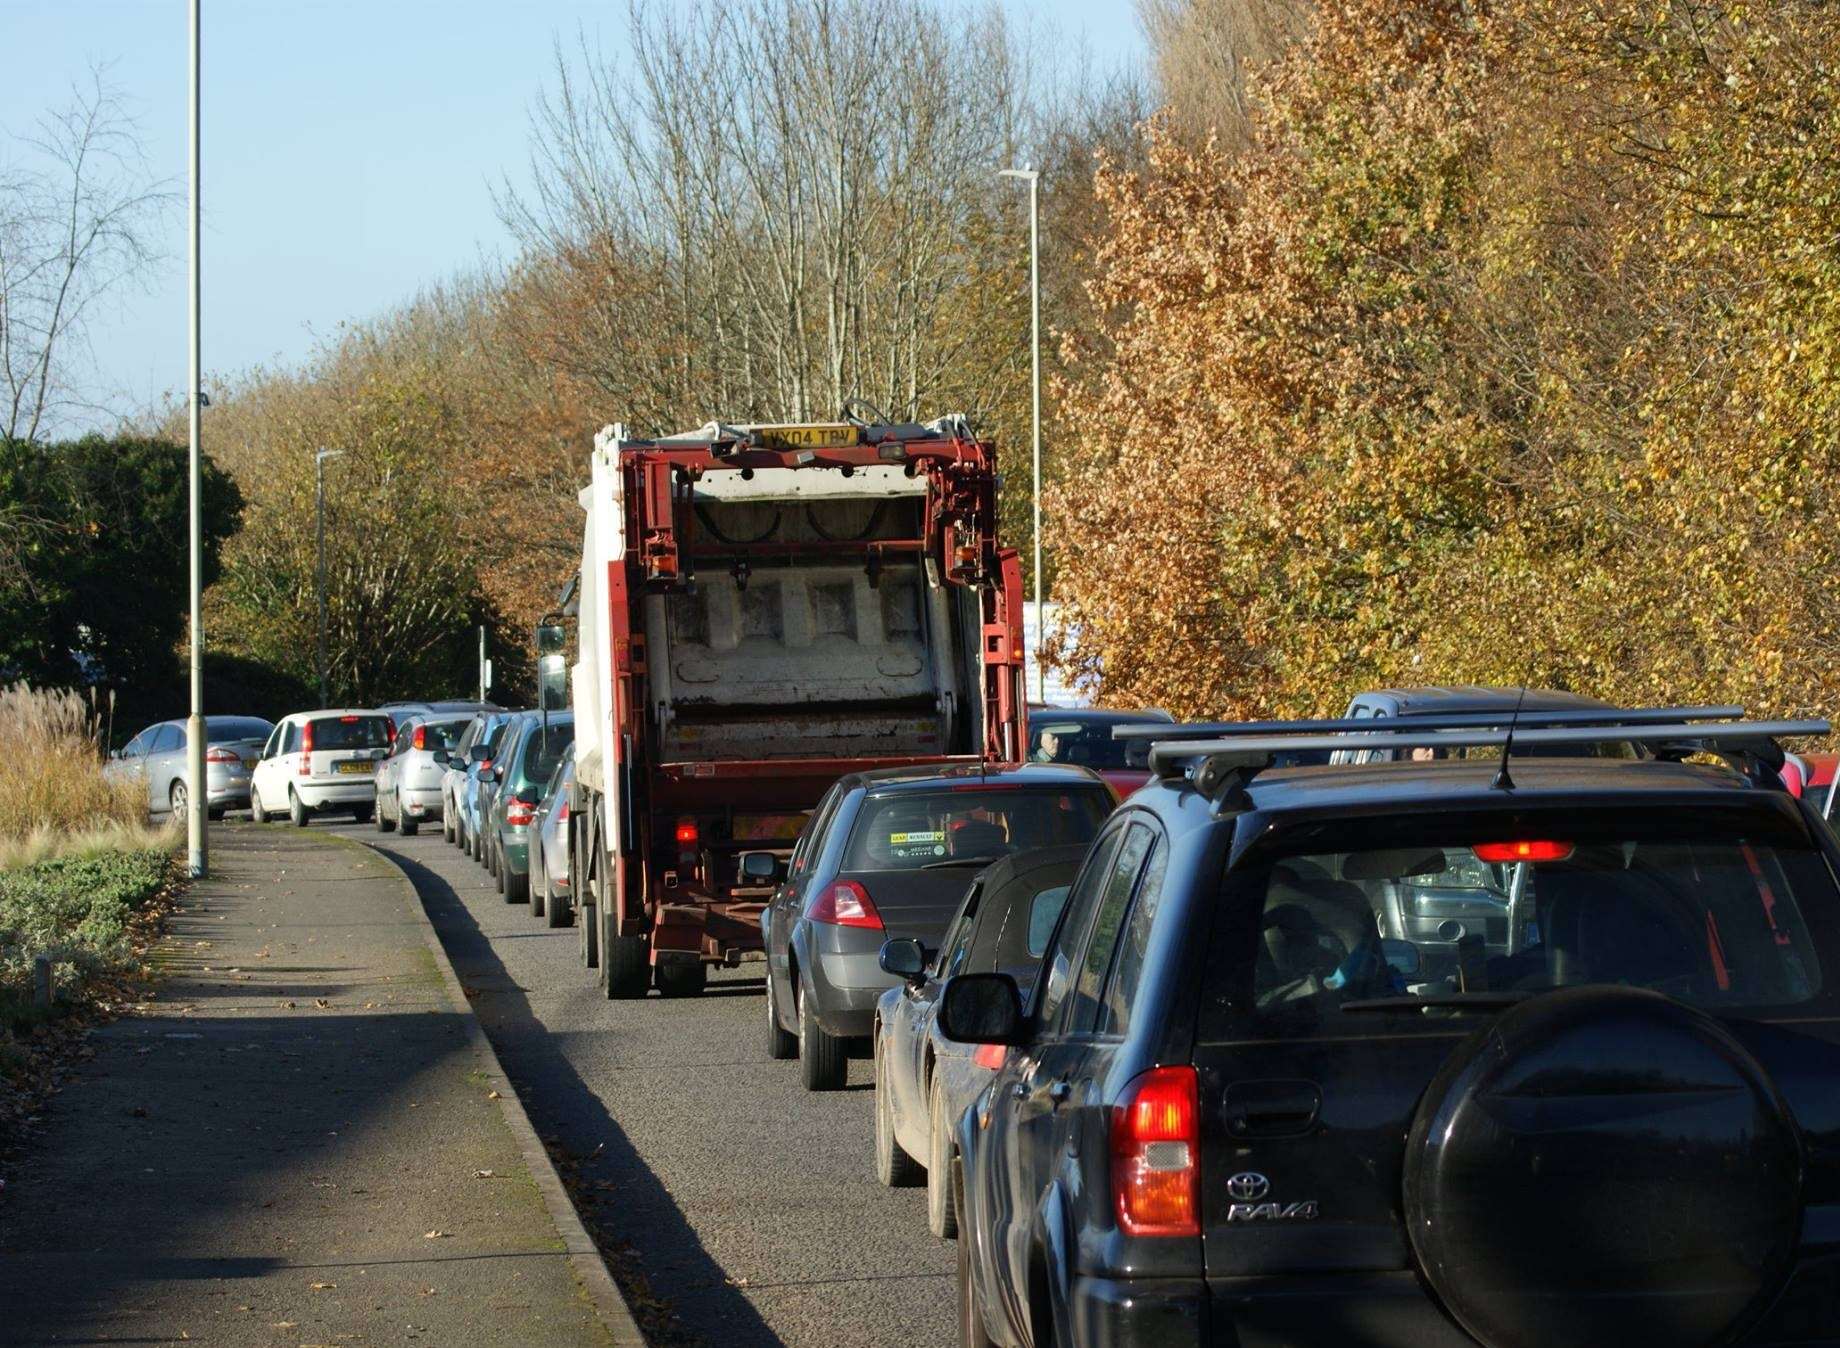 The site is known for traffic problems. An example from November 2016. Credit: Ian Sharp